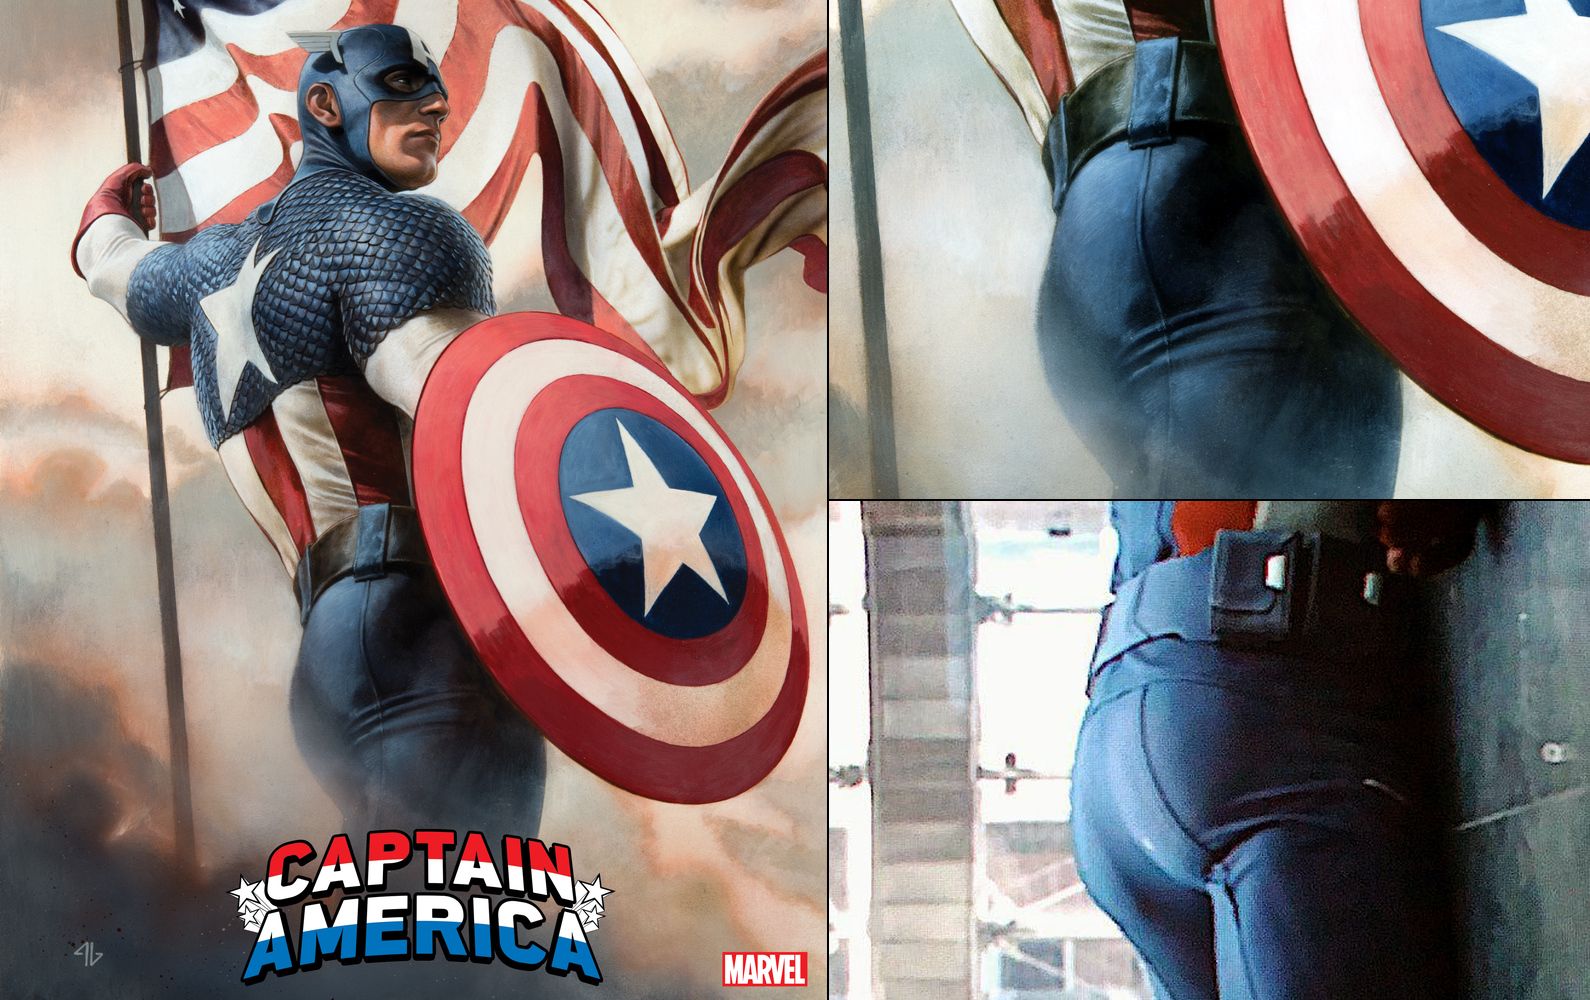 Marvel Officially Gives Captain America Chris Evans’ MCU Butt in New Art